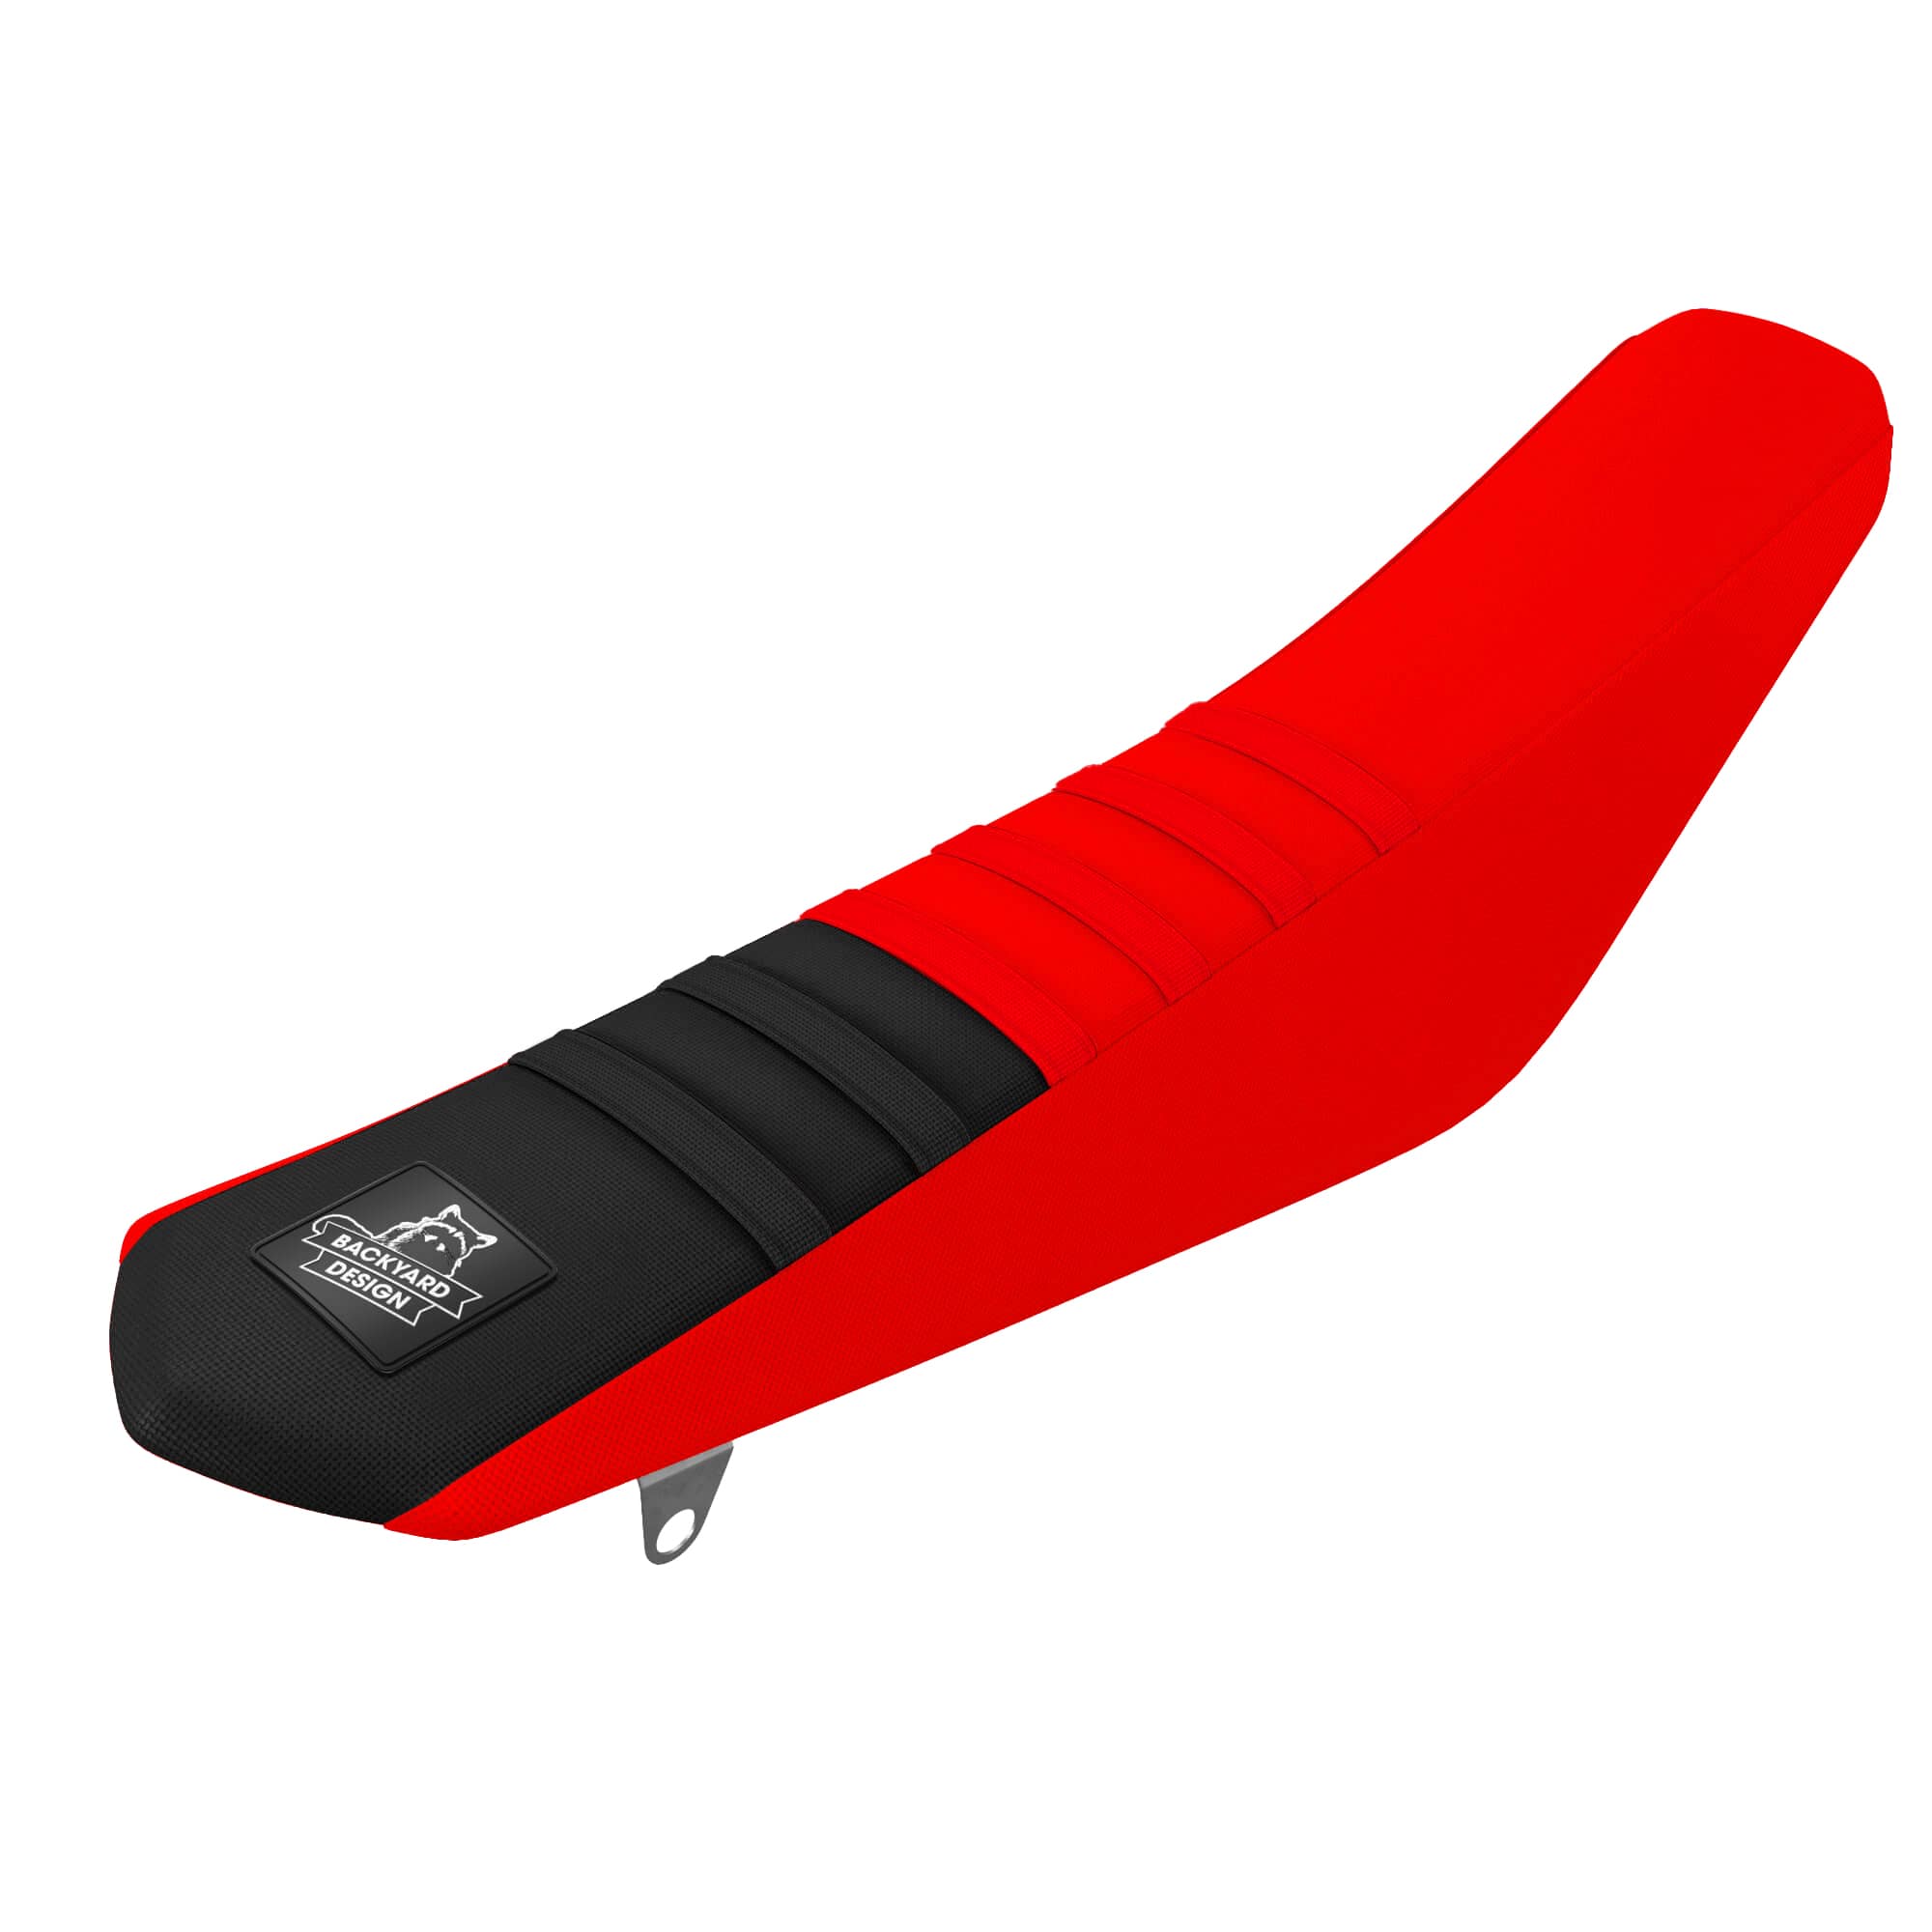 GasGas Red AnGasGas Red And Black Seatcover Mind Black Seatcover Min